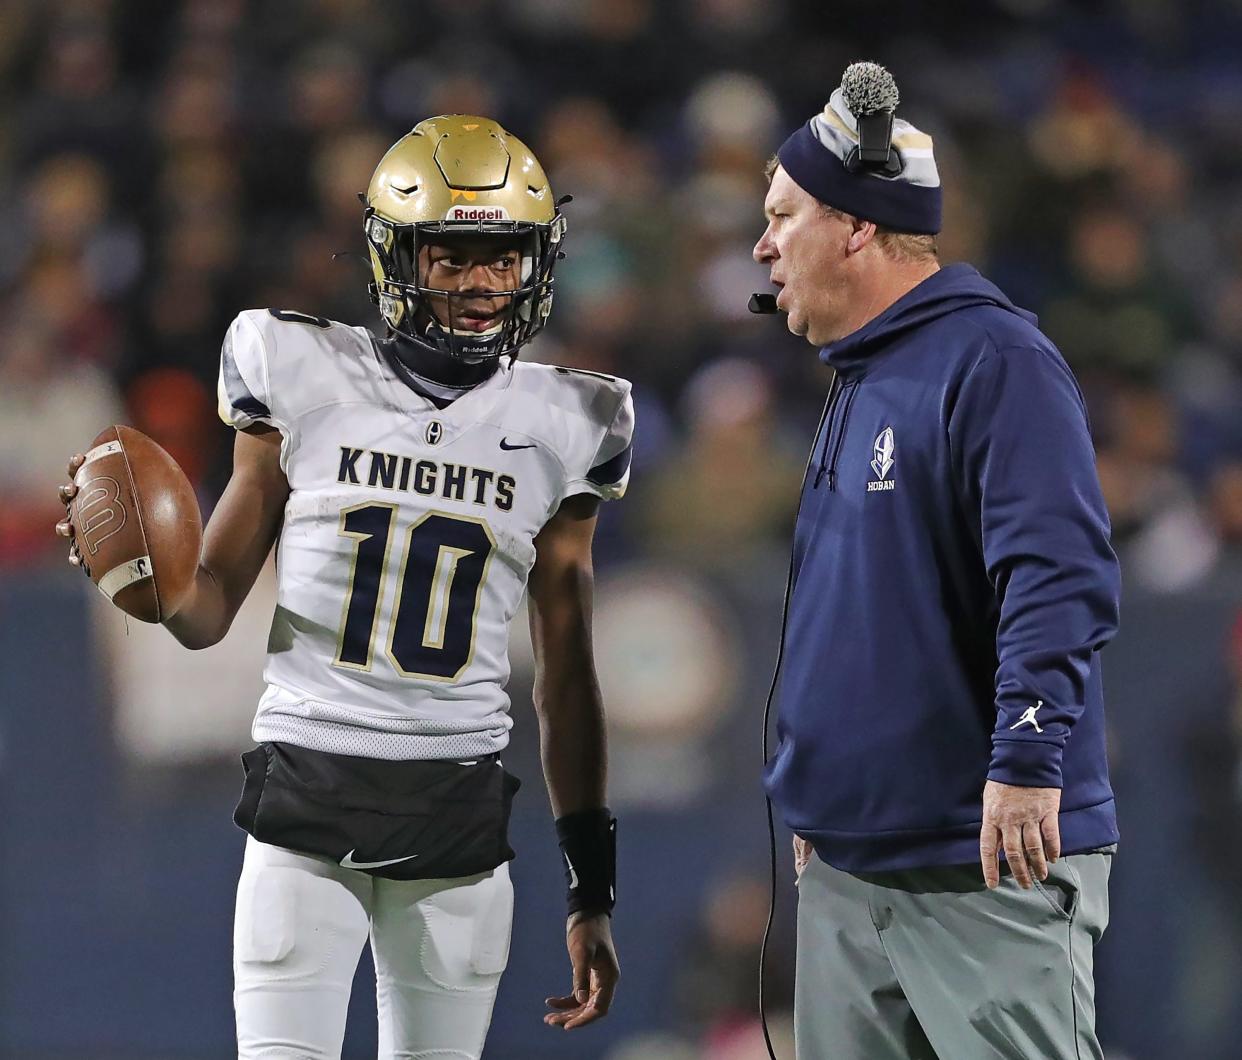 Hoban coach Tim Tyrrell used to be a coach in Florida and had to adapt to 7-on-7 and spring football. He sees many positives to it coming to Ohio.